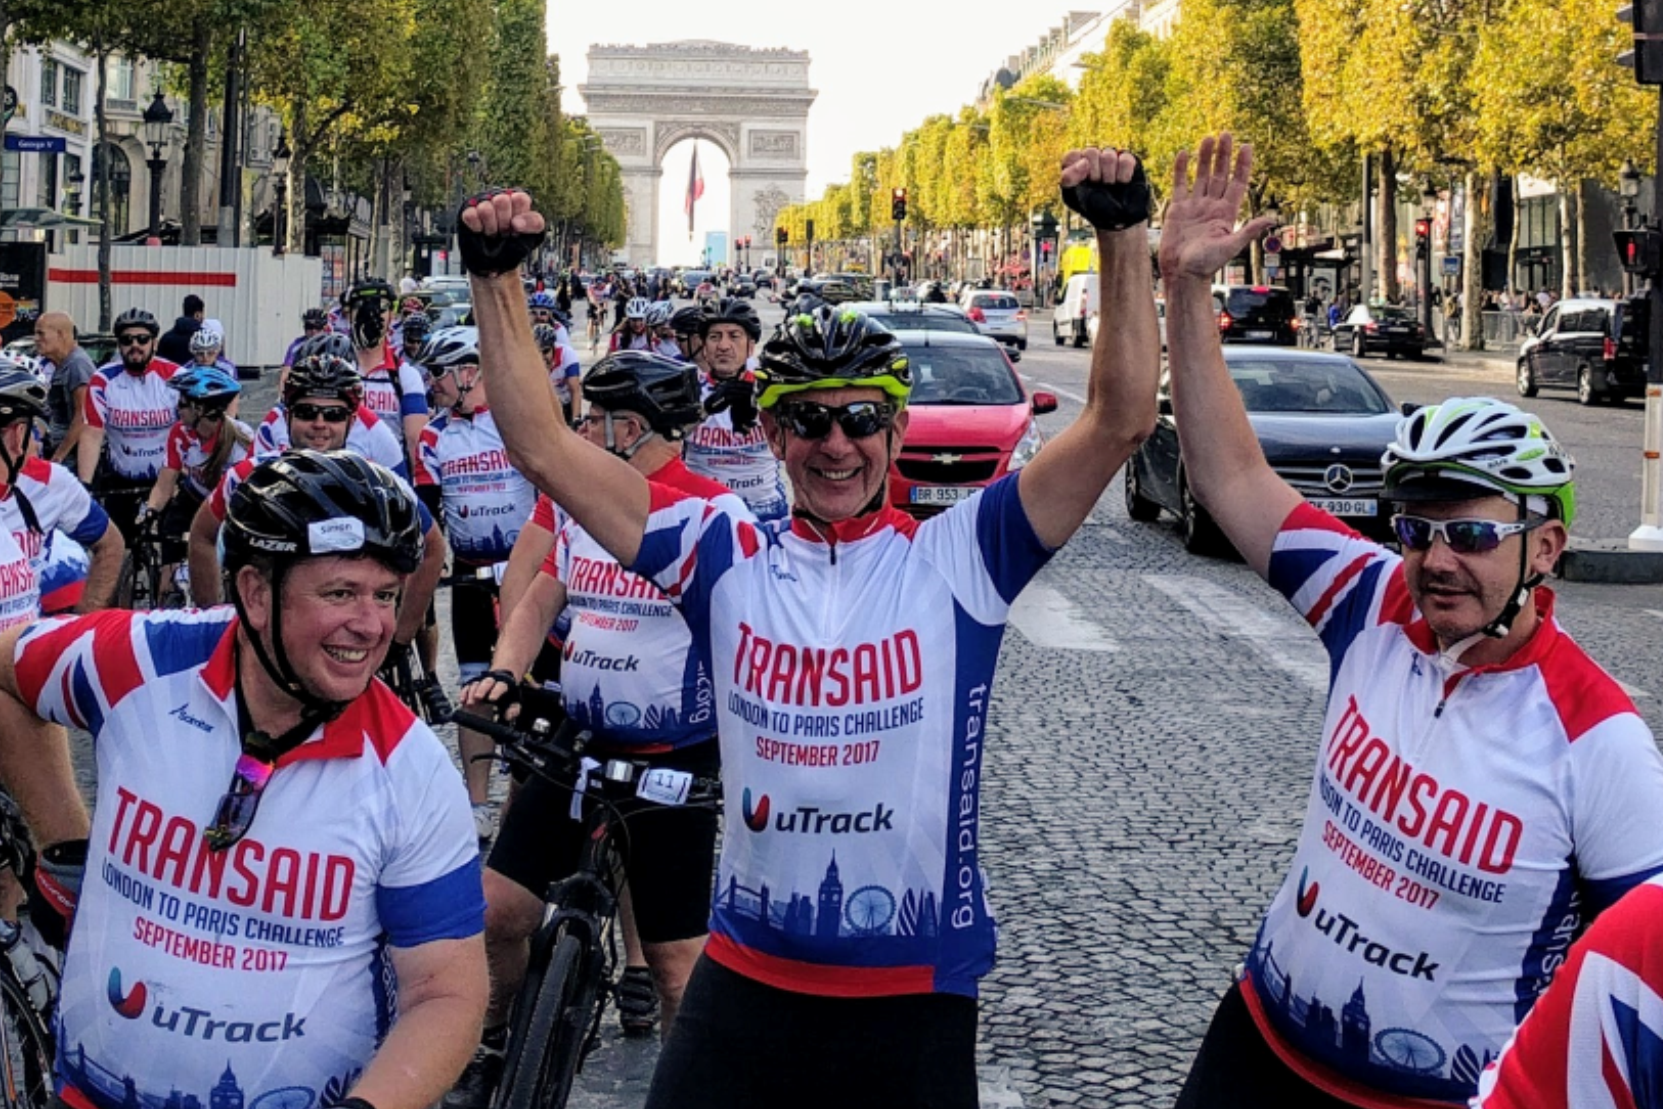 uTrack Software to sponsor Transaid’s London to Paris Cycle Challenge